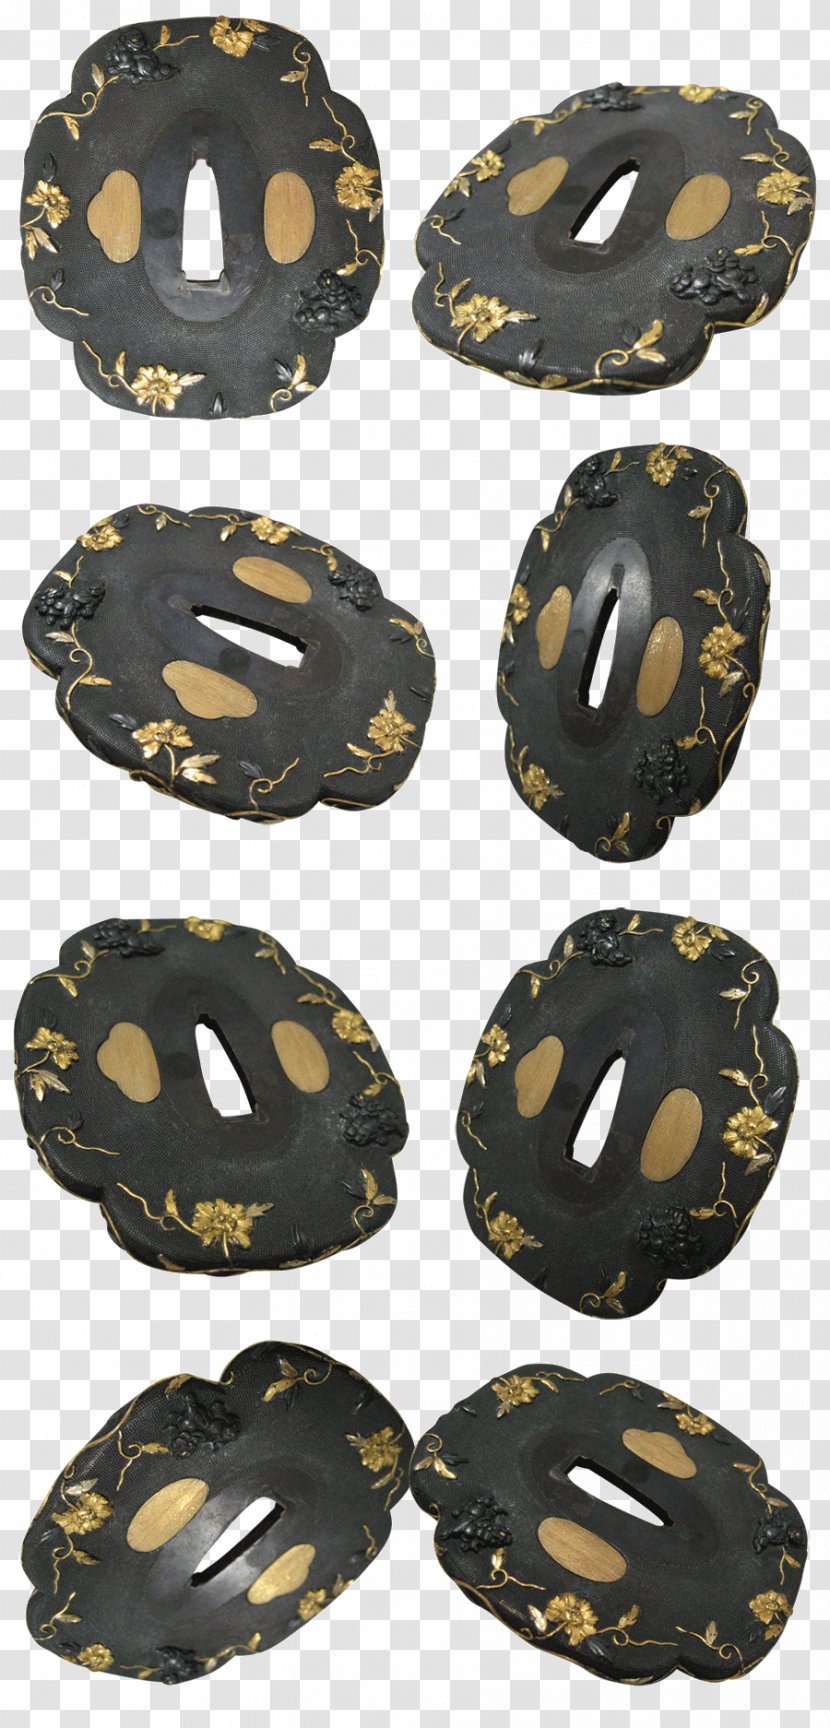 Helmet Pattern - Personal Protective Equipment Transparent PNG